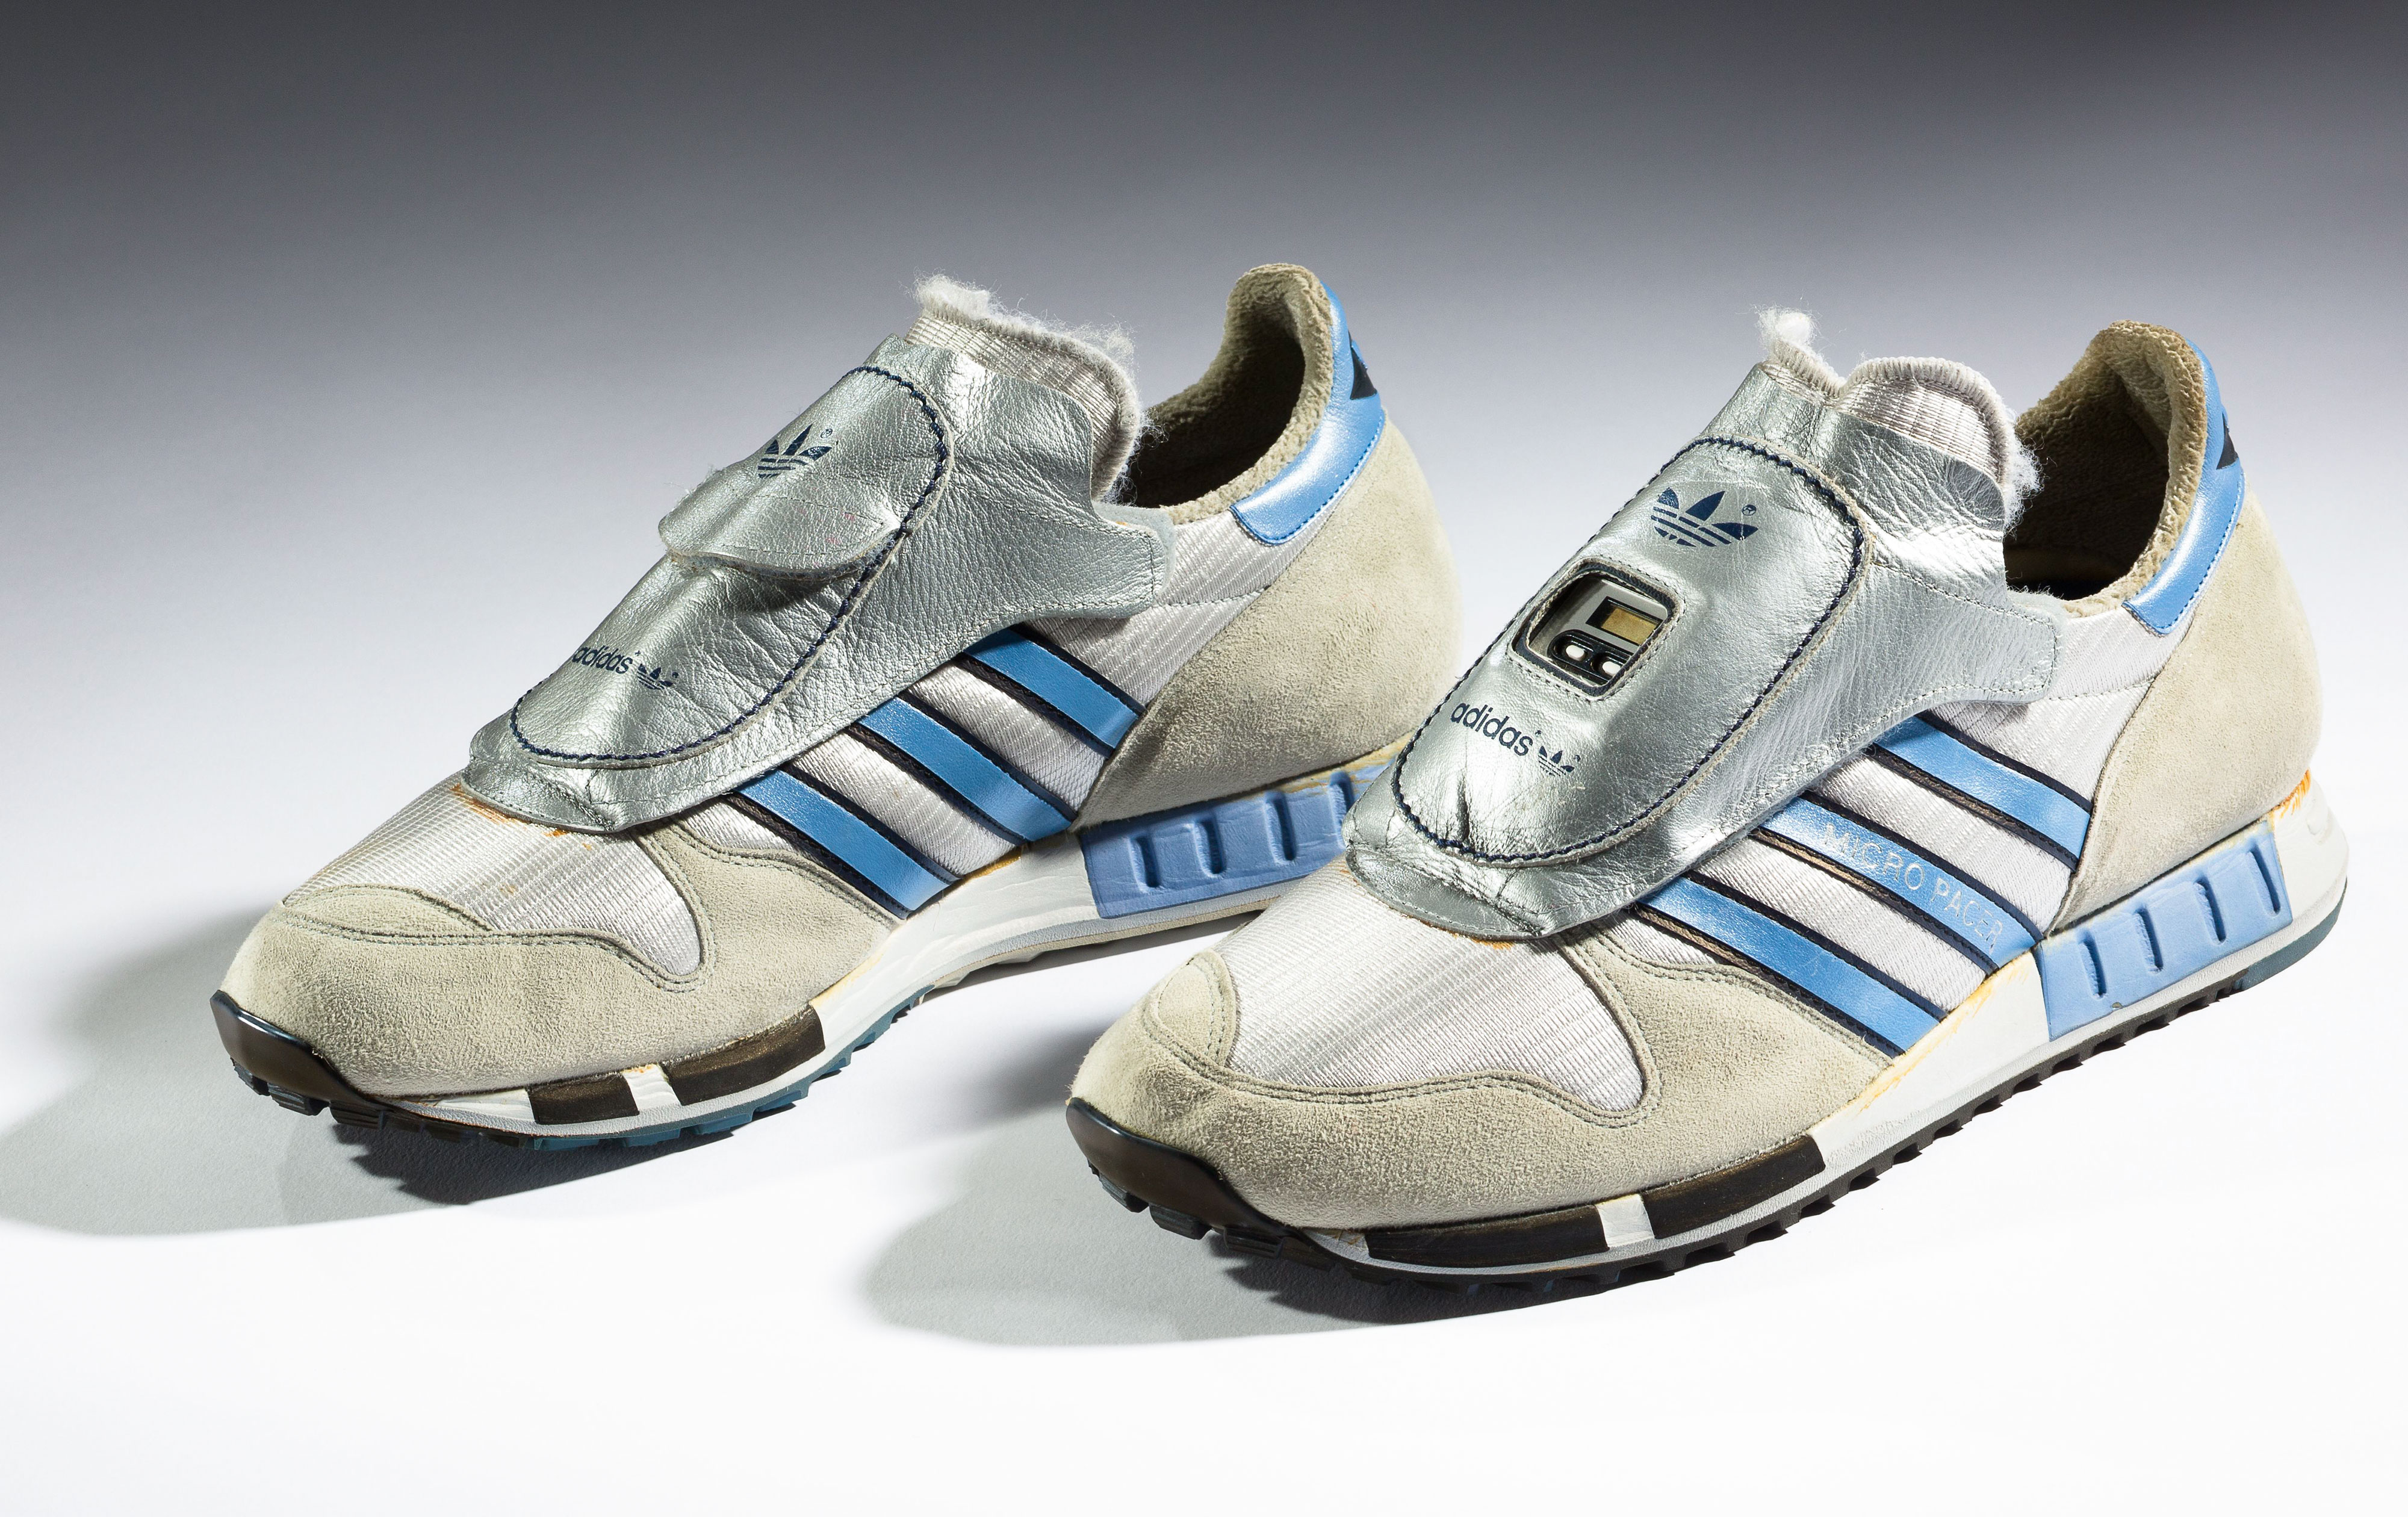 Adidas Micropacer 1984